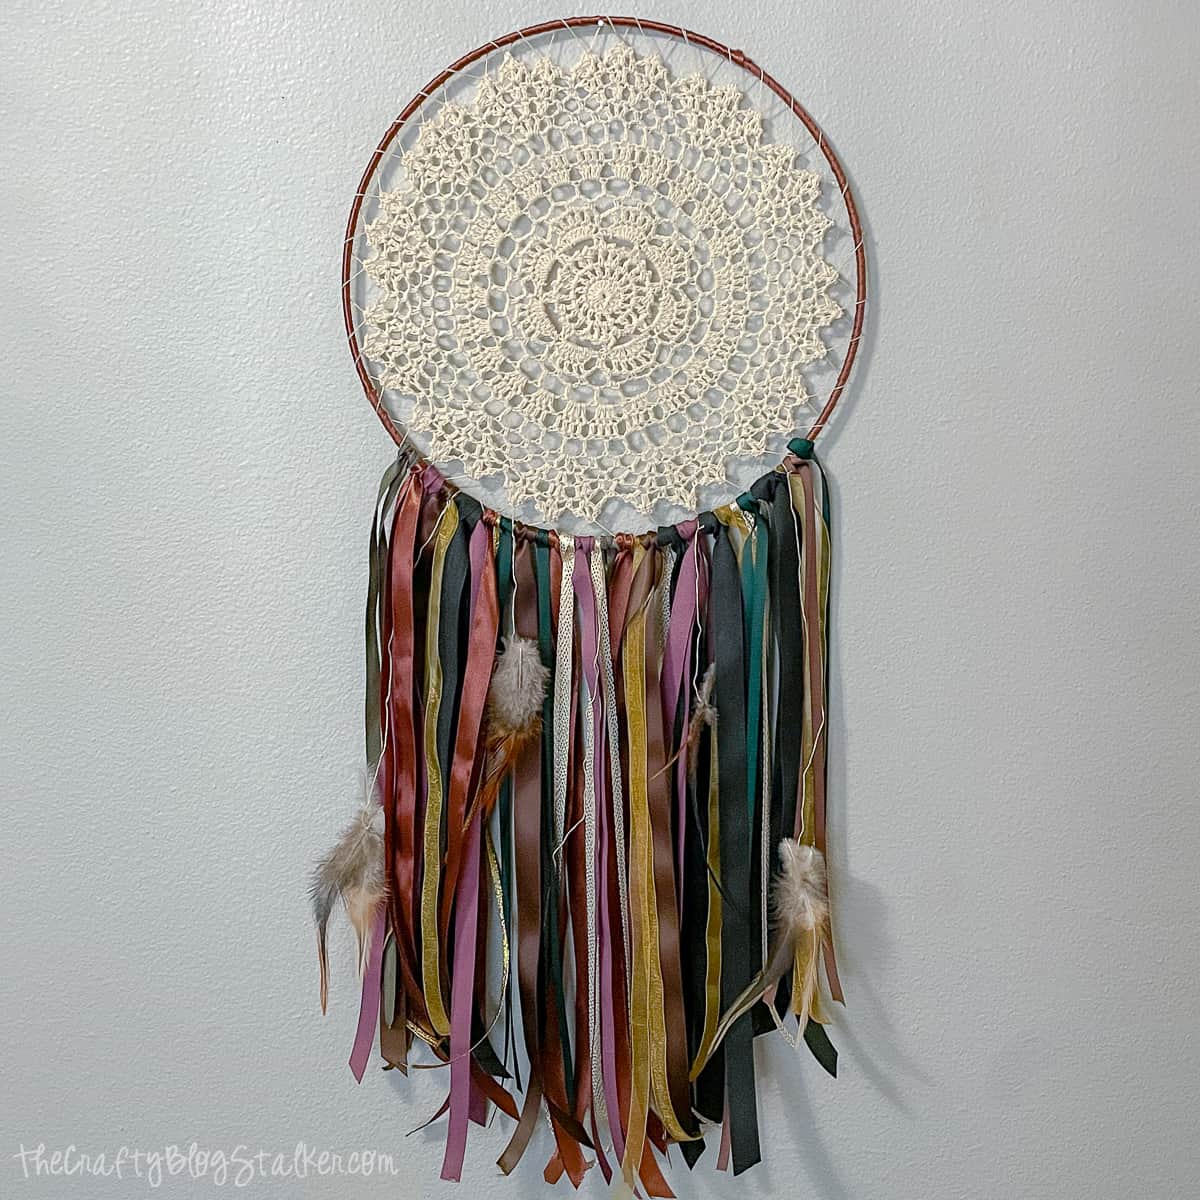 finished dreamcatcher